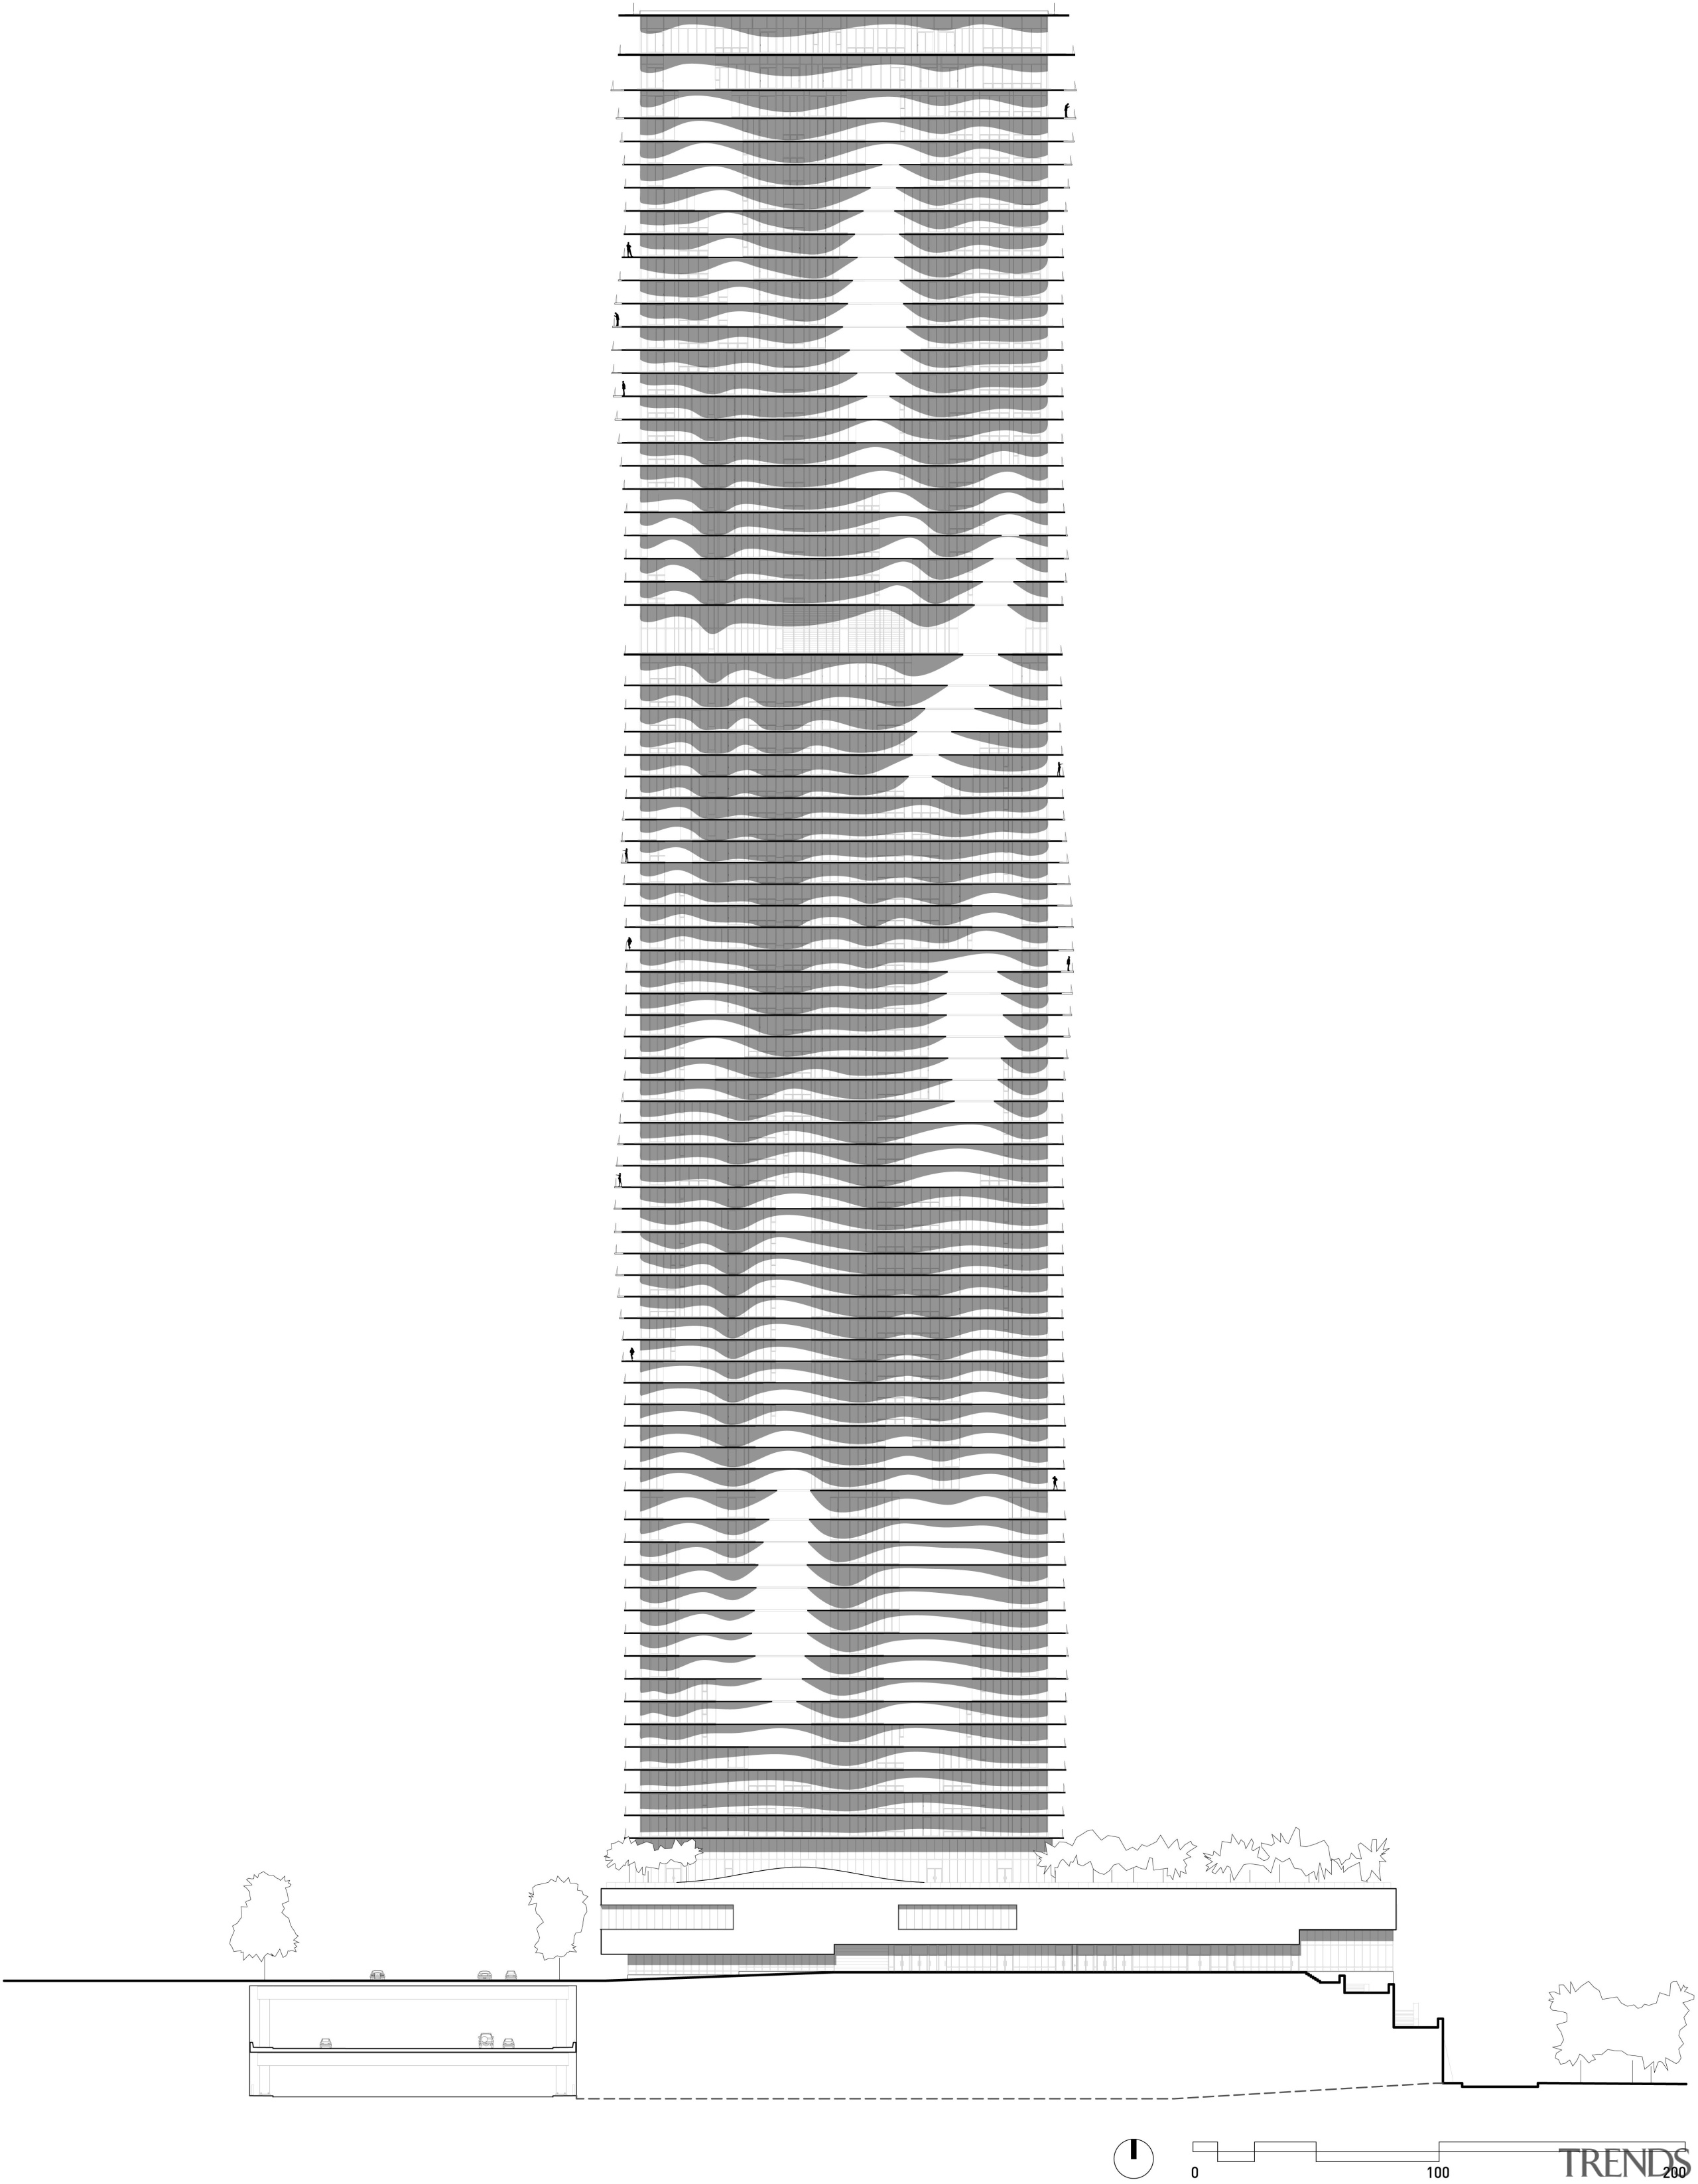 View of architectural drawings of the Aqua Tower line, product design, structure, white